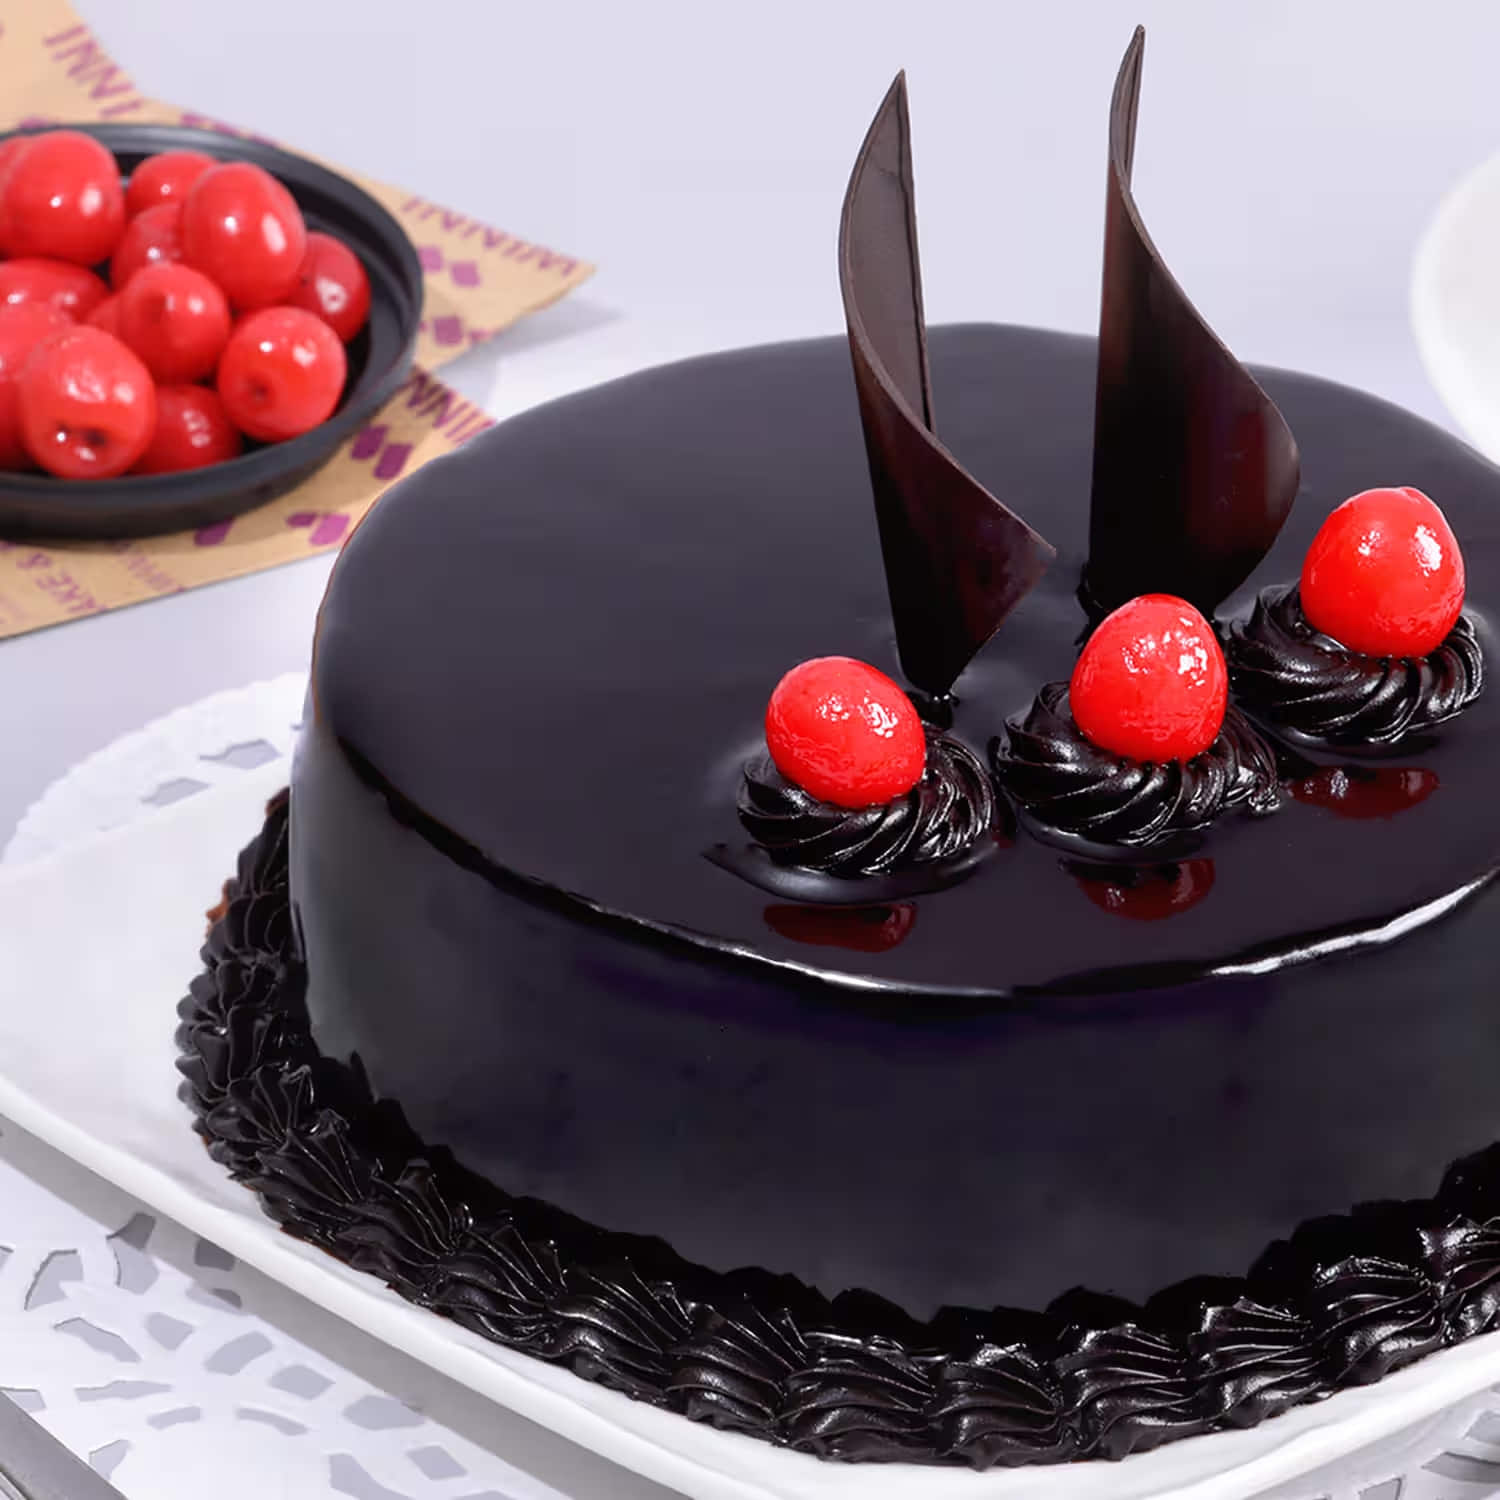 Choco Vanilla 1 Kg Cake Rs 800 Only | Birthday Cake Delivery Hyderabad |  Cake Plus Gift - Largest Online Cake Delivery Hyderabad